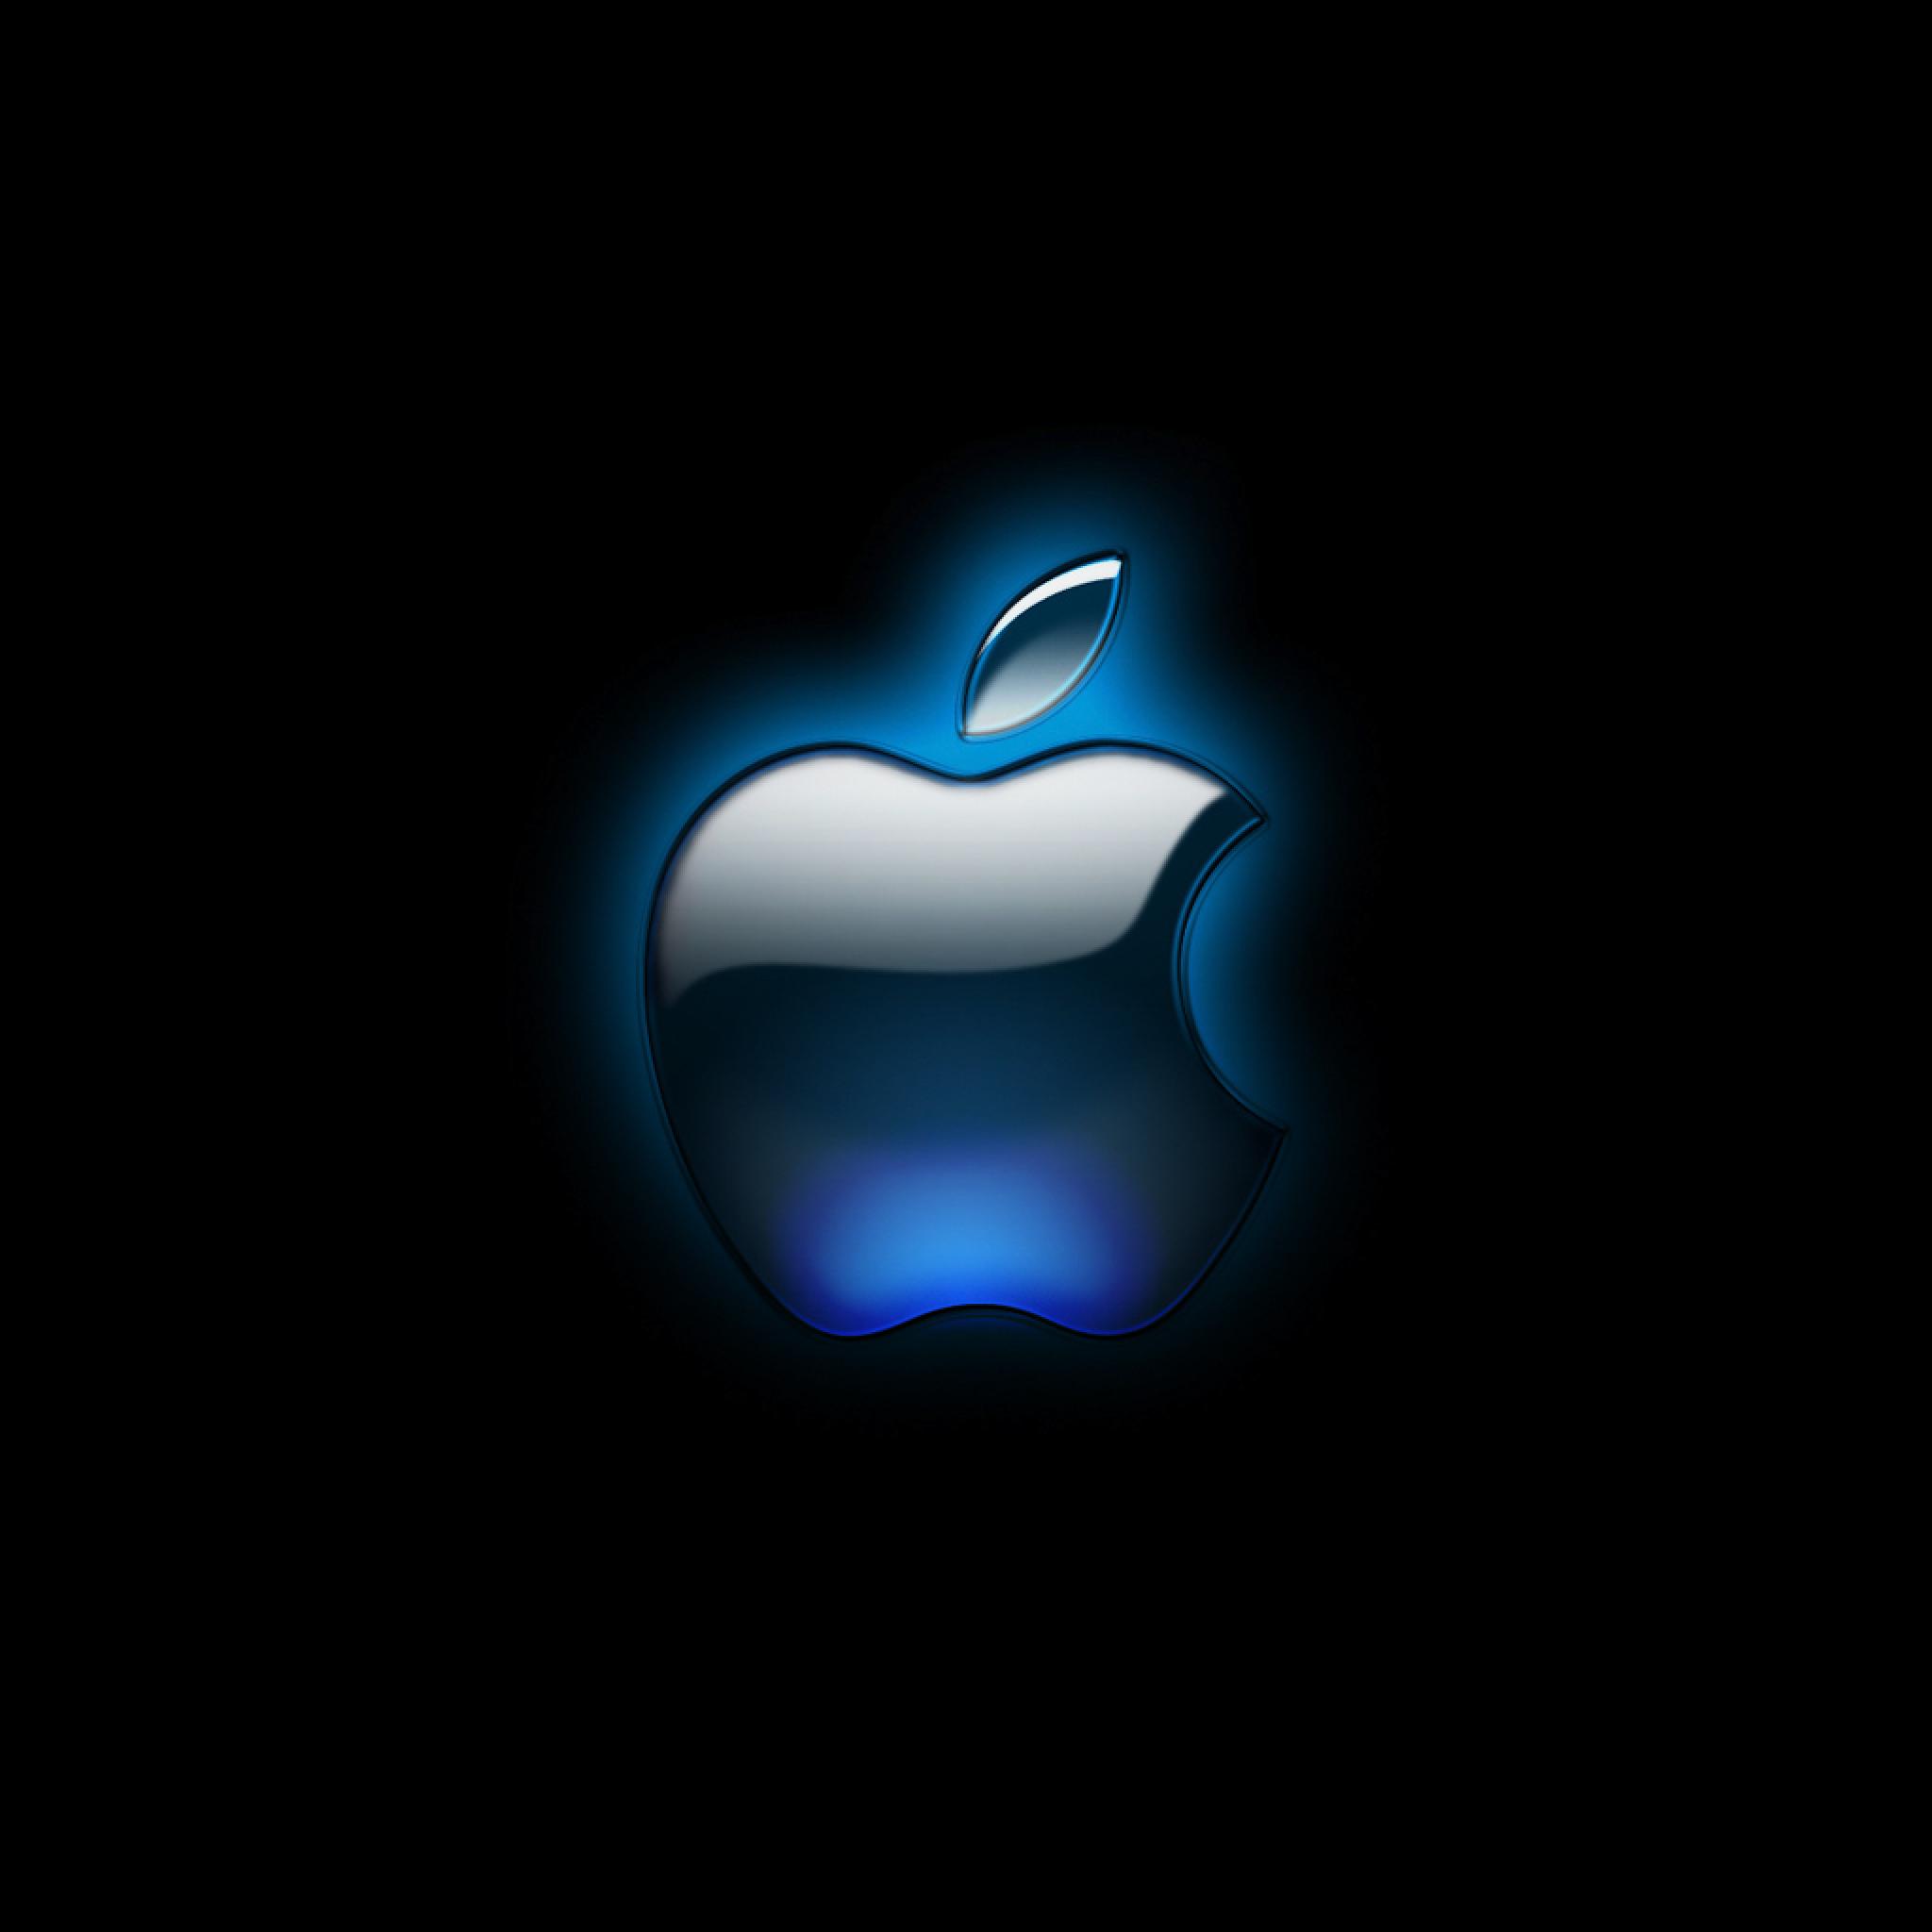 Outstanding Blue Ice Glossy Apple Logo Luxury Dark Background Wallpaper 48x48px Marvellous Free Wallpaper For Iphone 7678 Ipad タブレット壁紙 ギャラリー